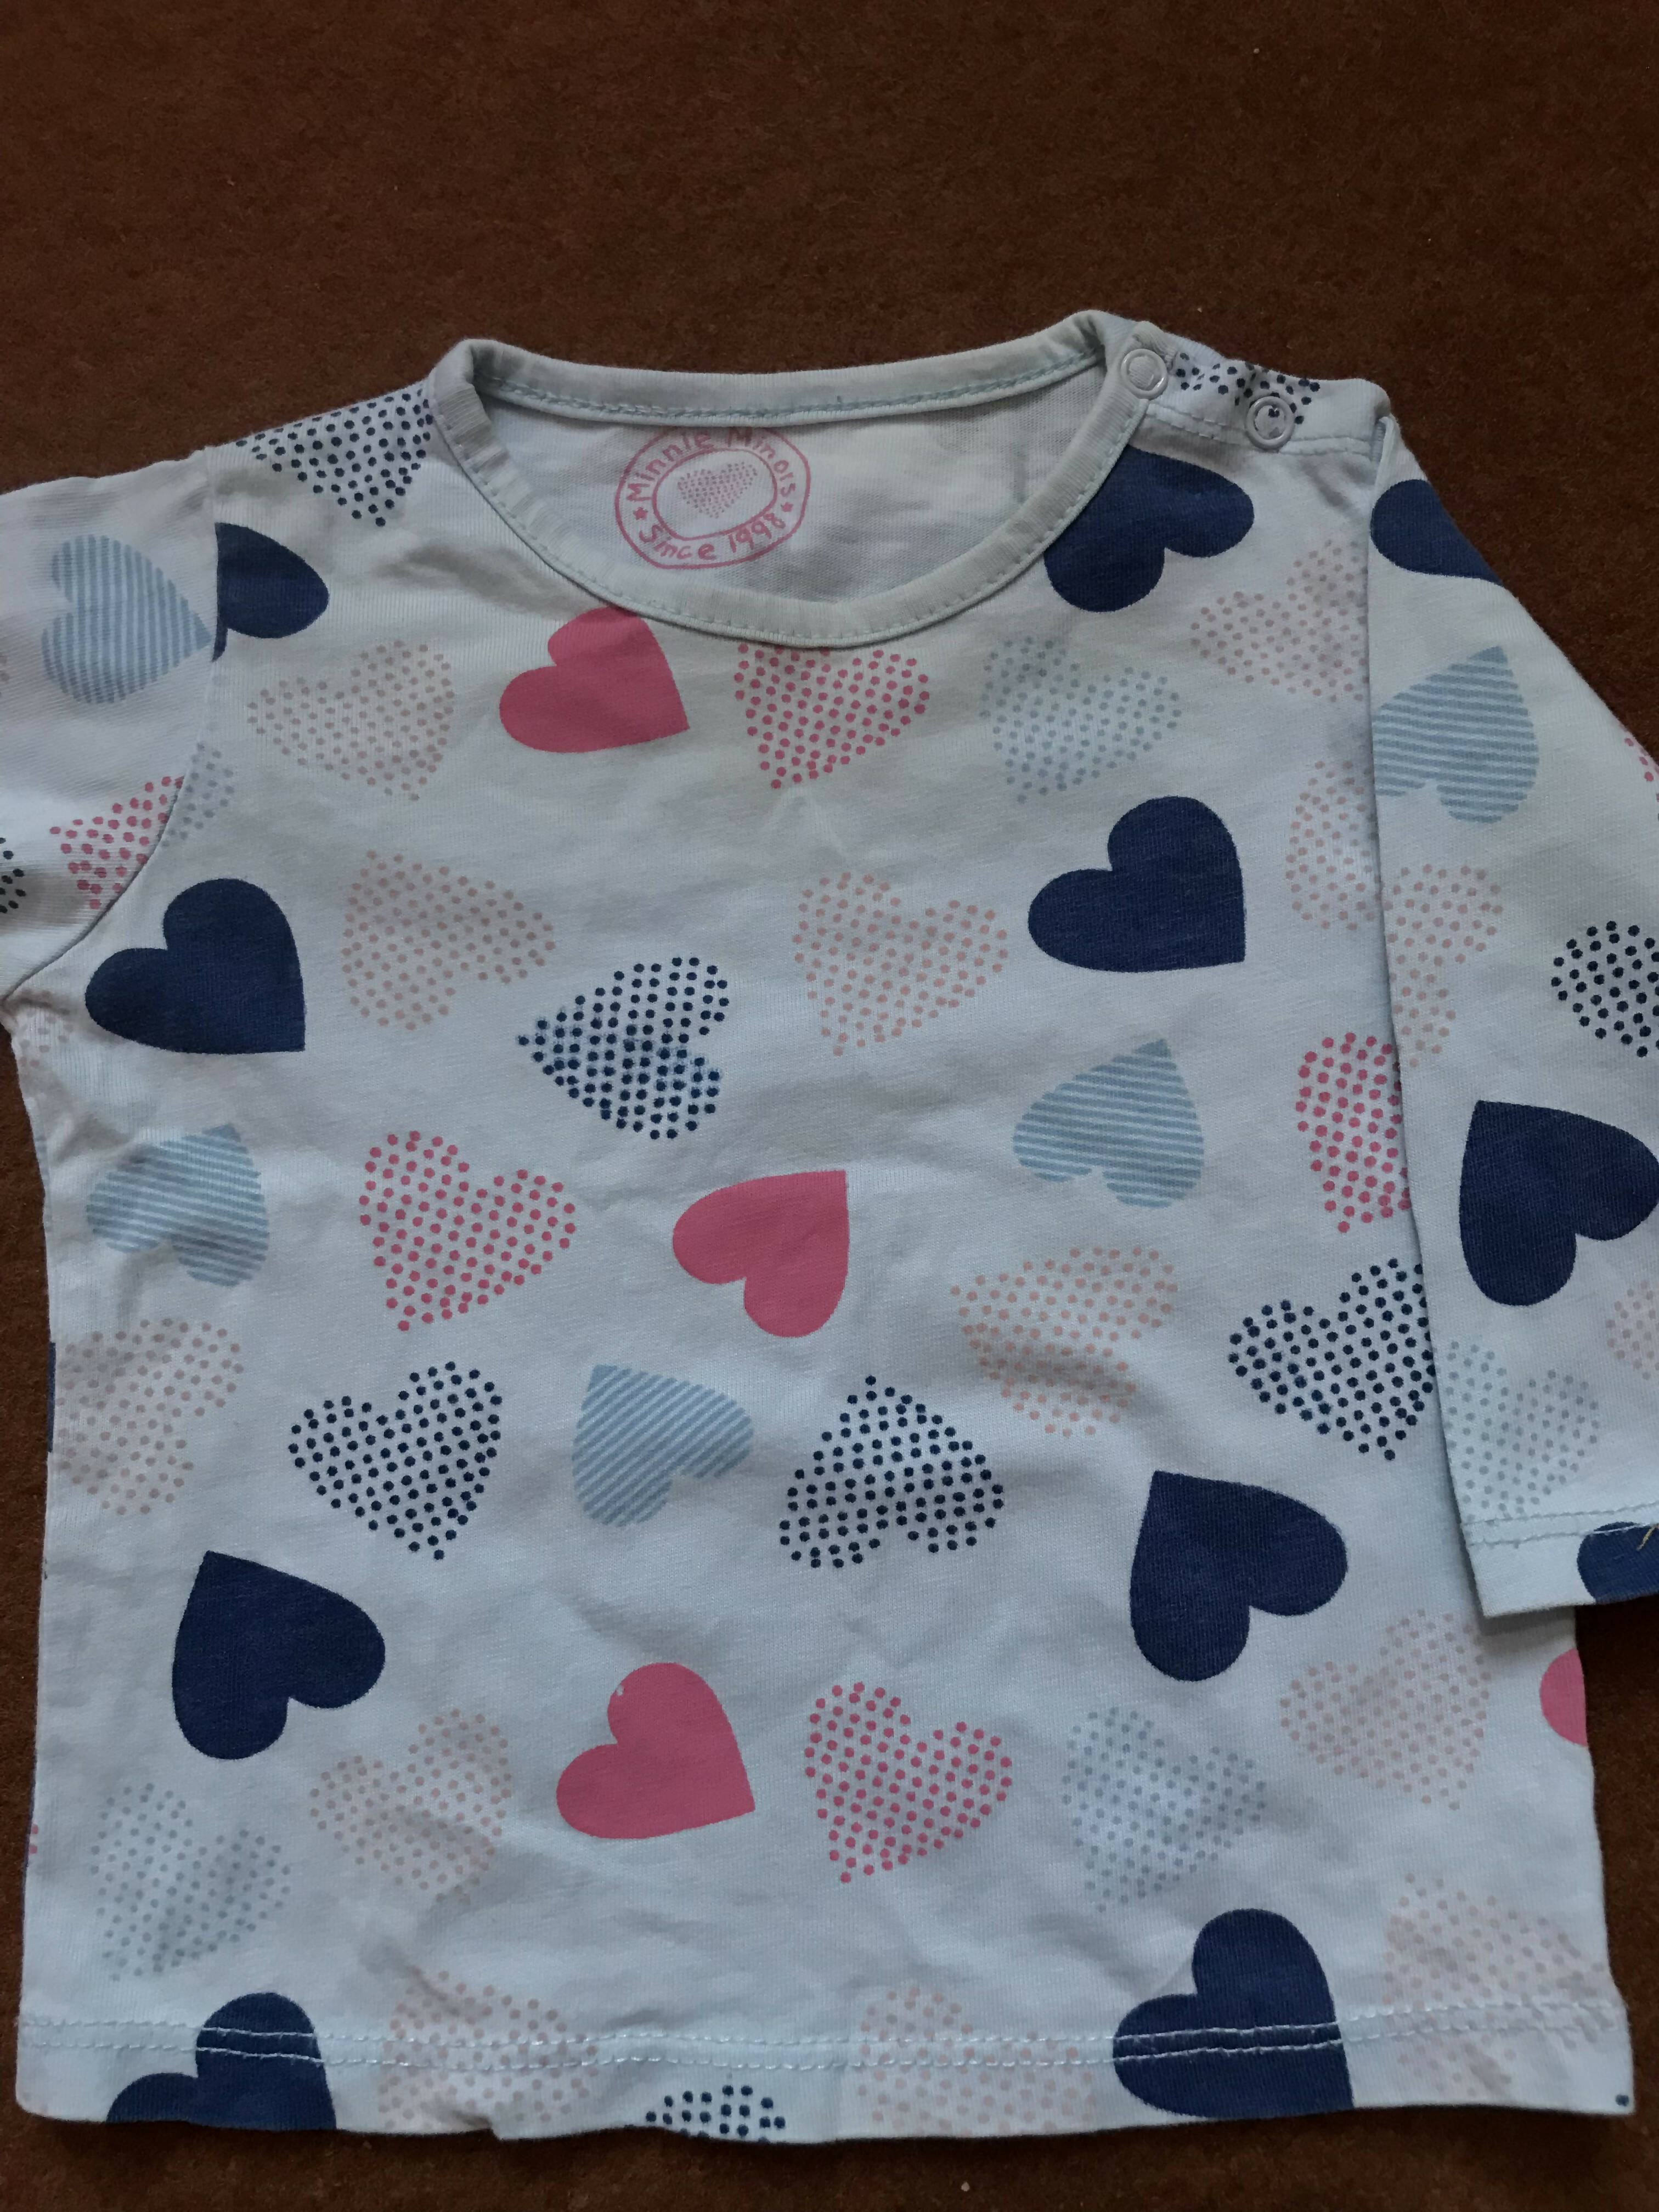 Minnie minors | Pack of 2 shirts (Size: 2-6 months baby ) | Kids Tops & Shirts | Worn Once